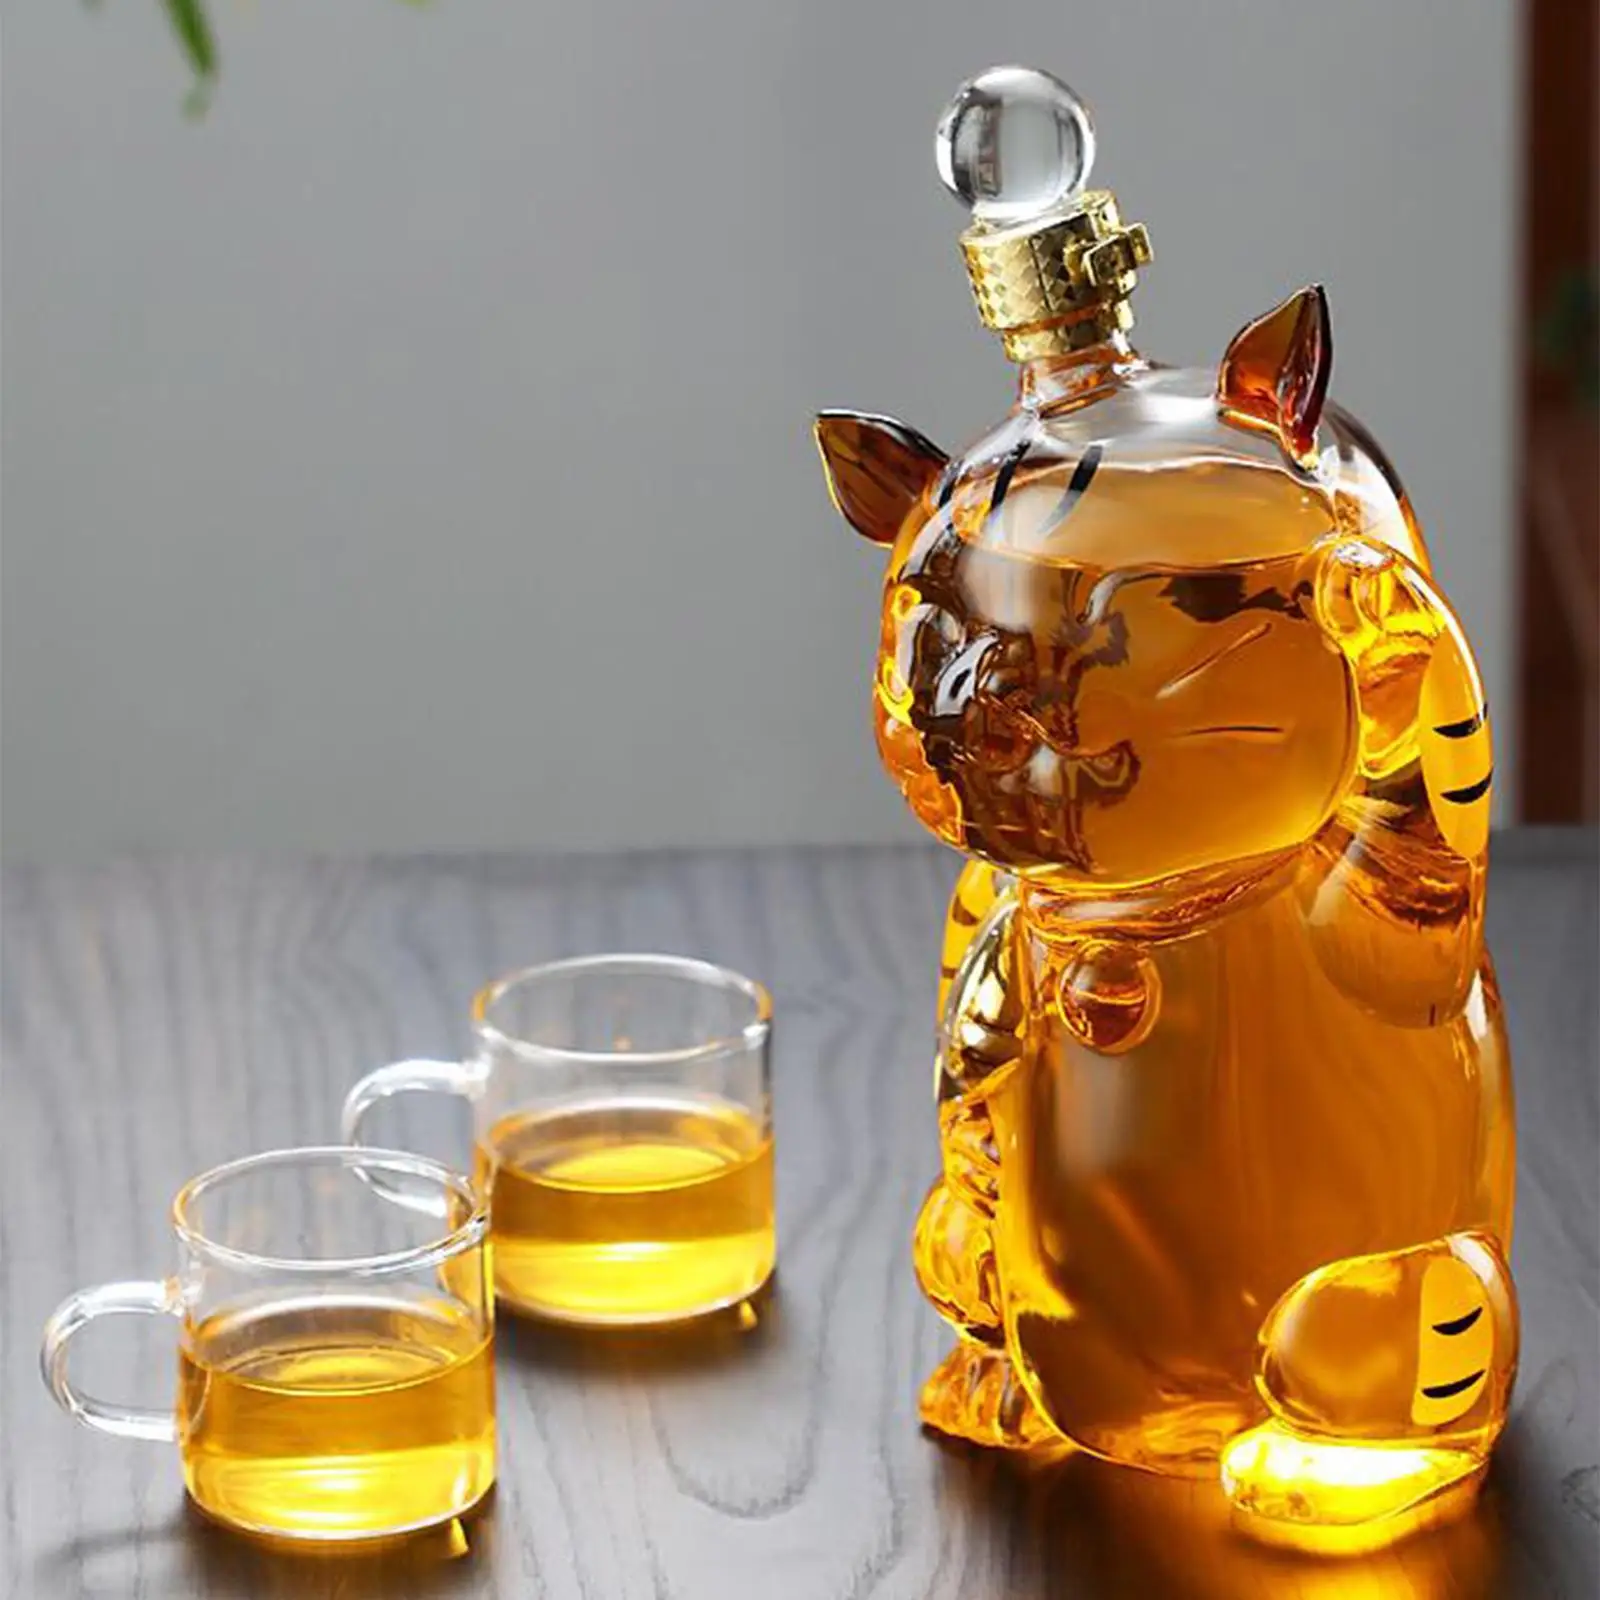 Cat Shaped Glass Decanter Glass Holder with Stopper Bottle Drinkware Dispenser Carafe 1000ml for Dining Party Decoration Gift